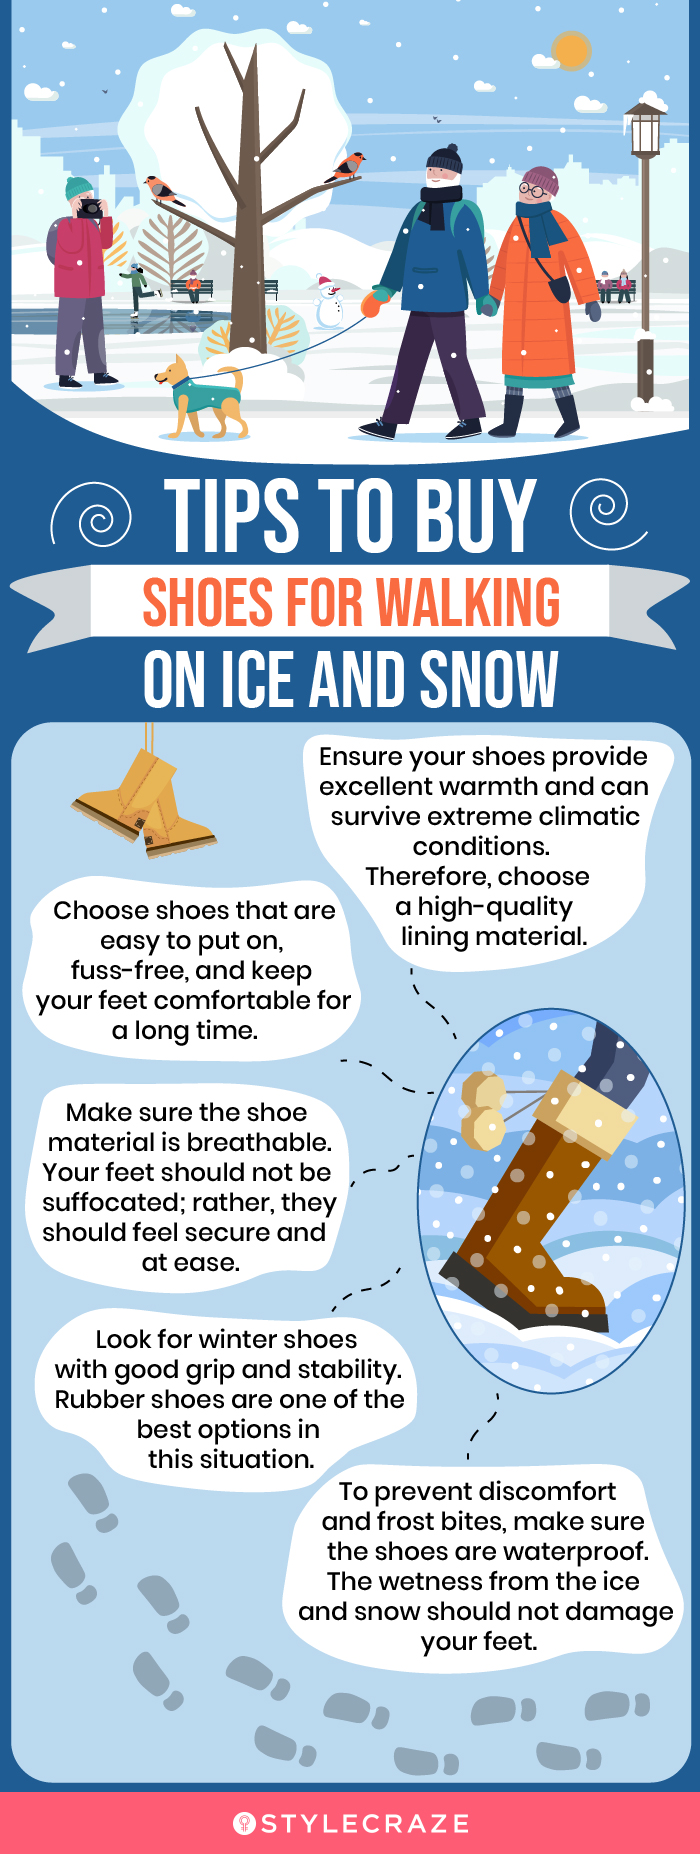 Tips To Buy Shoes For Walking On Ice And Snow